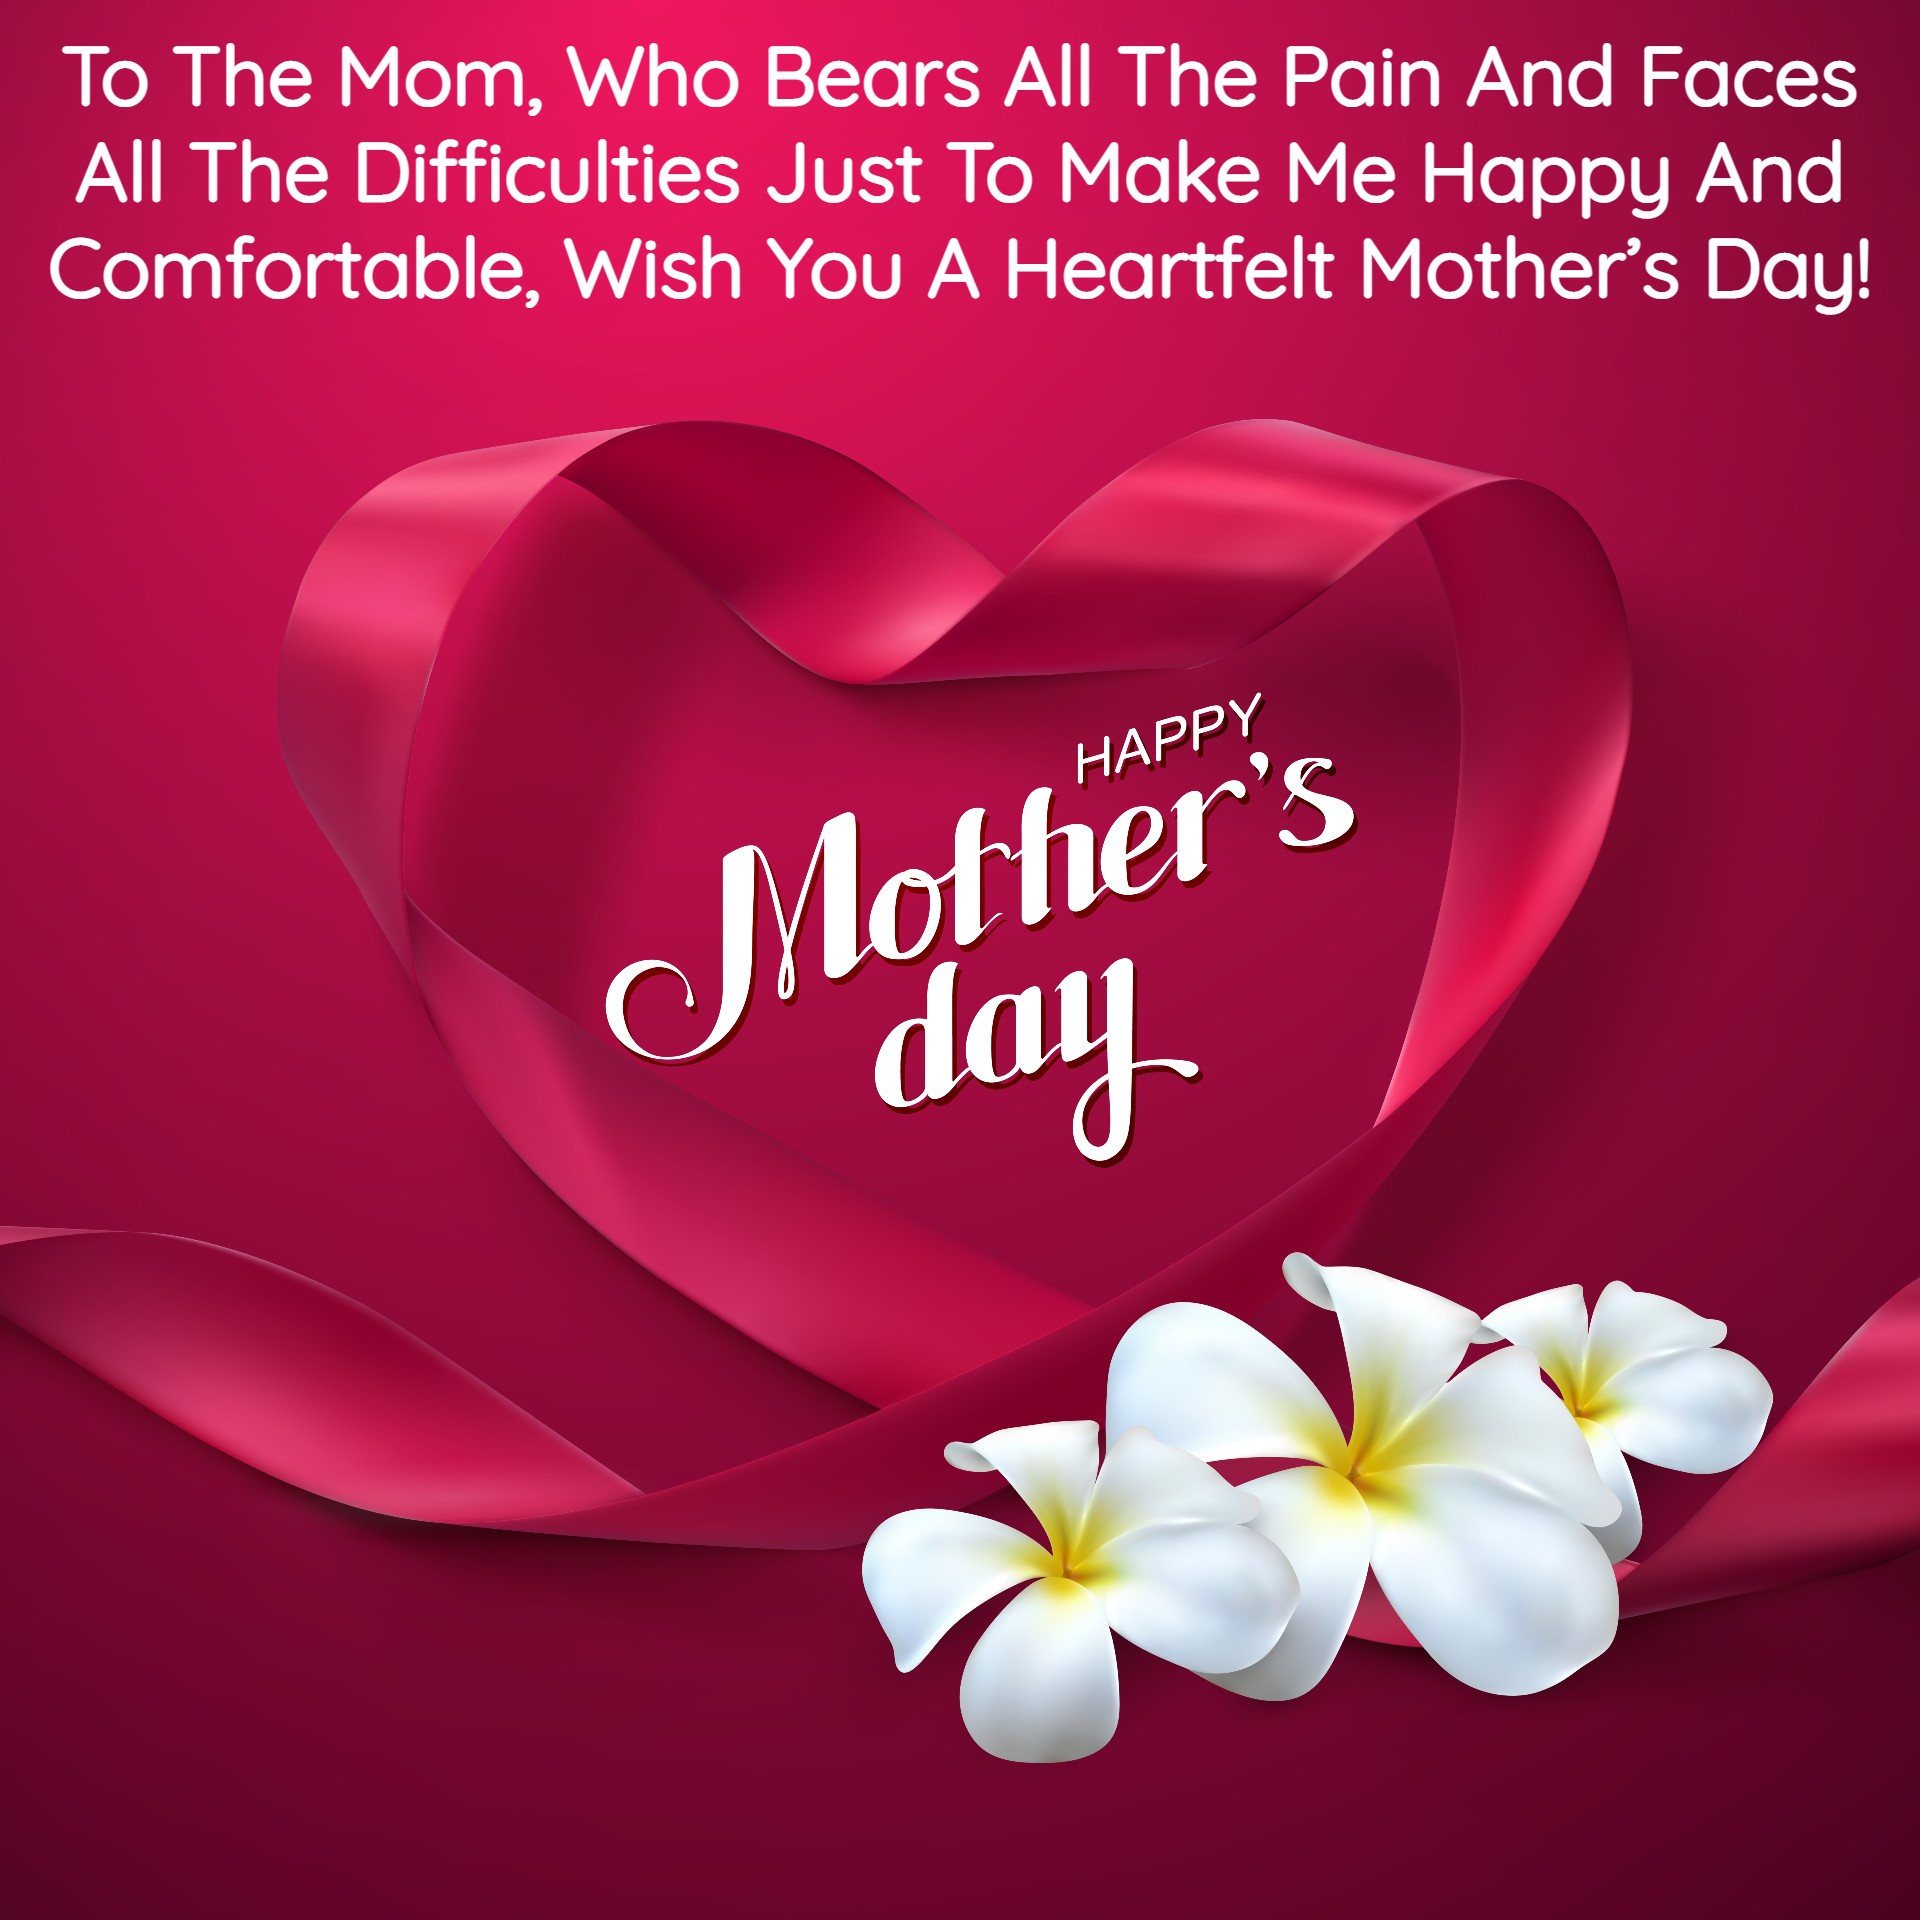 https://images.news18.com/ibnlive/uploads/2023/05/happy-mothers-day-2023-wishes-images.jpg